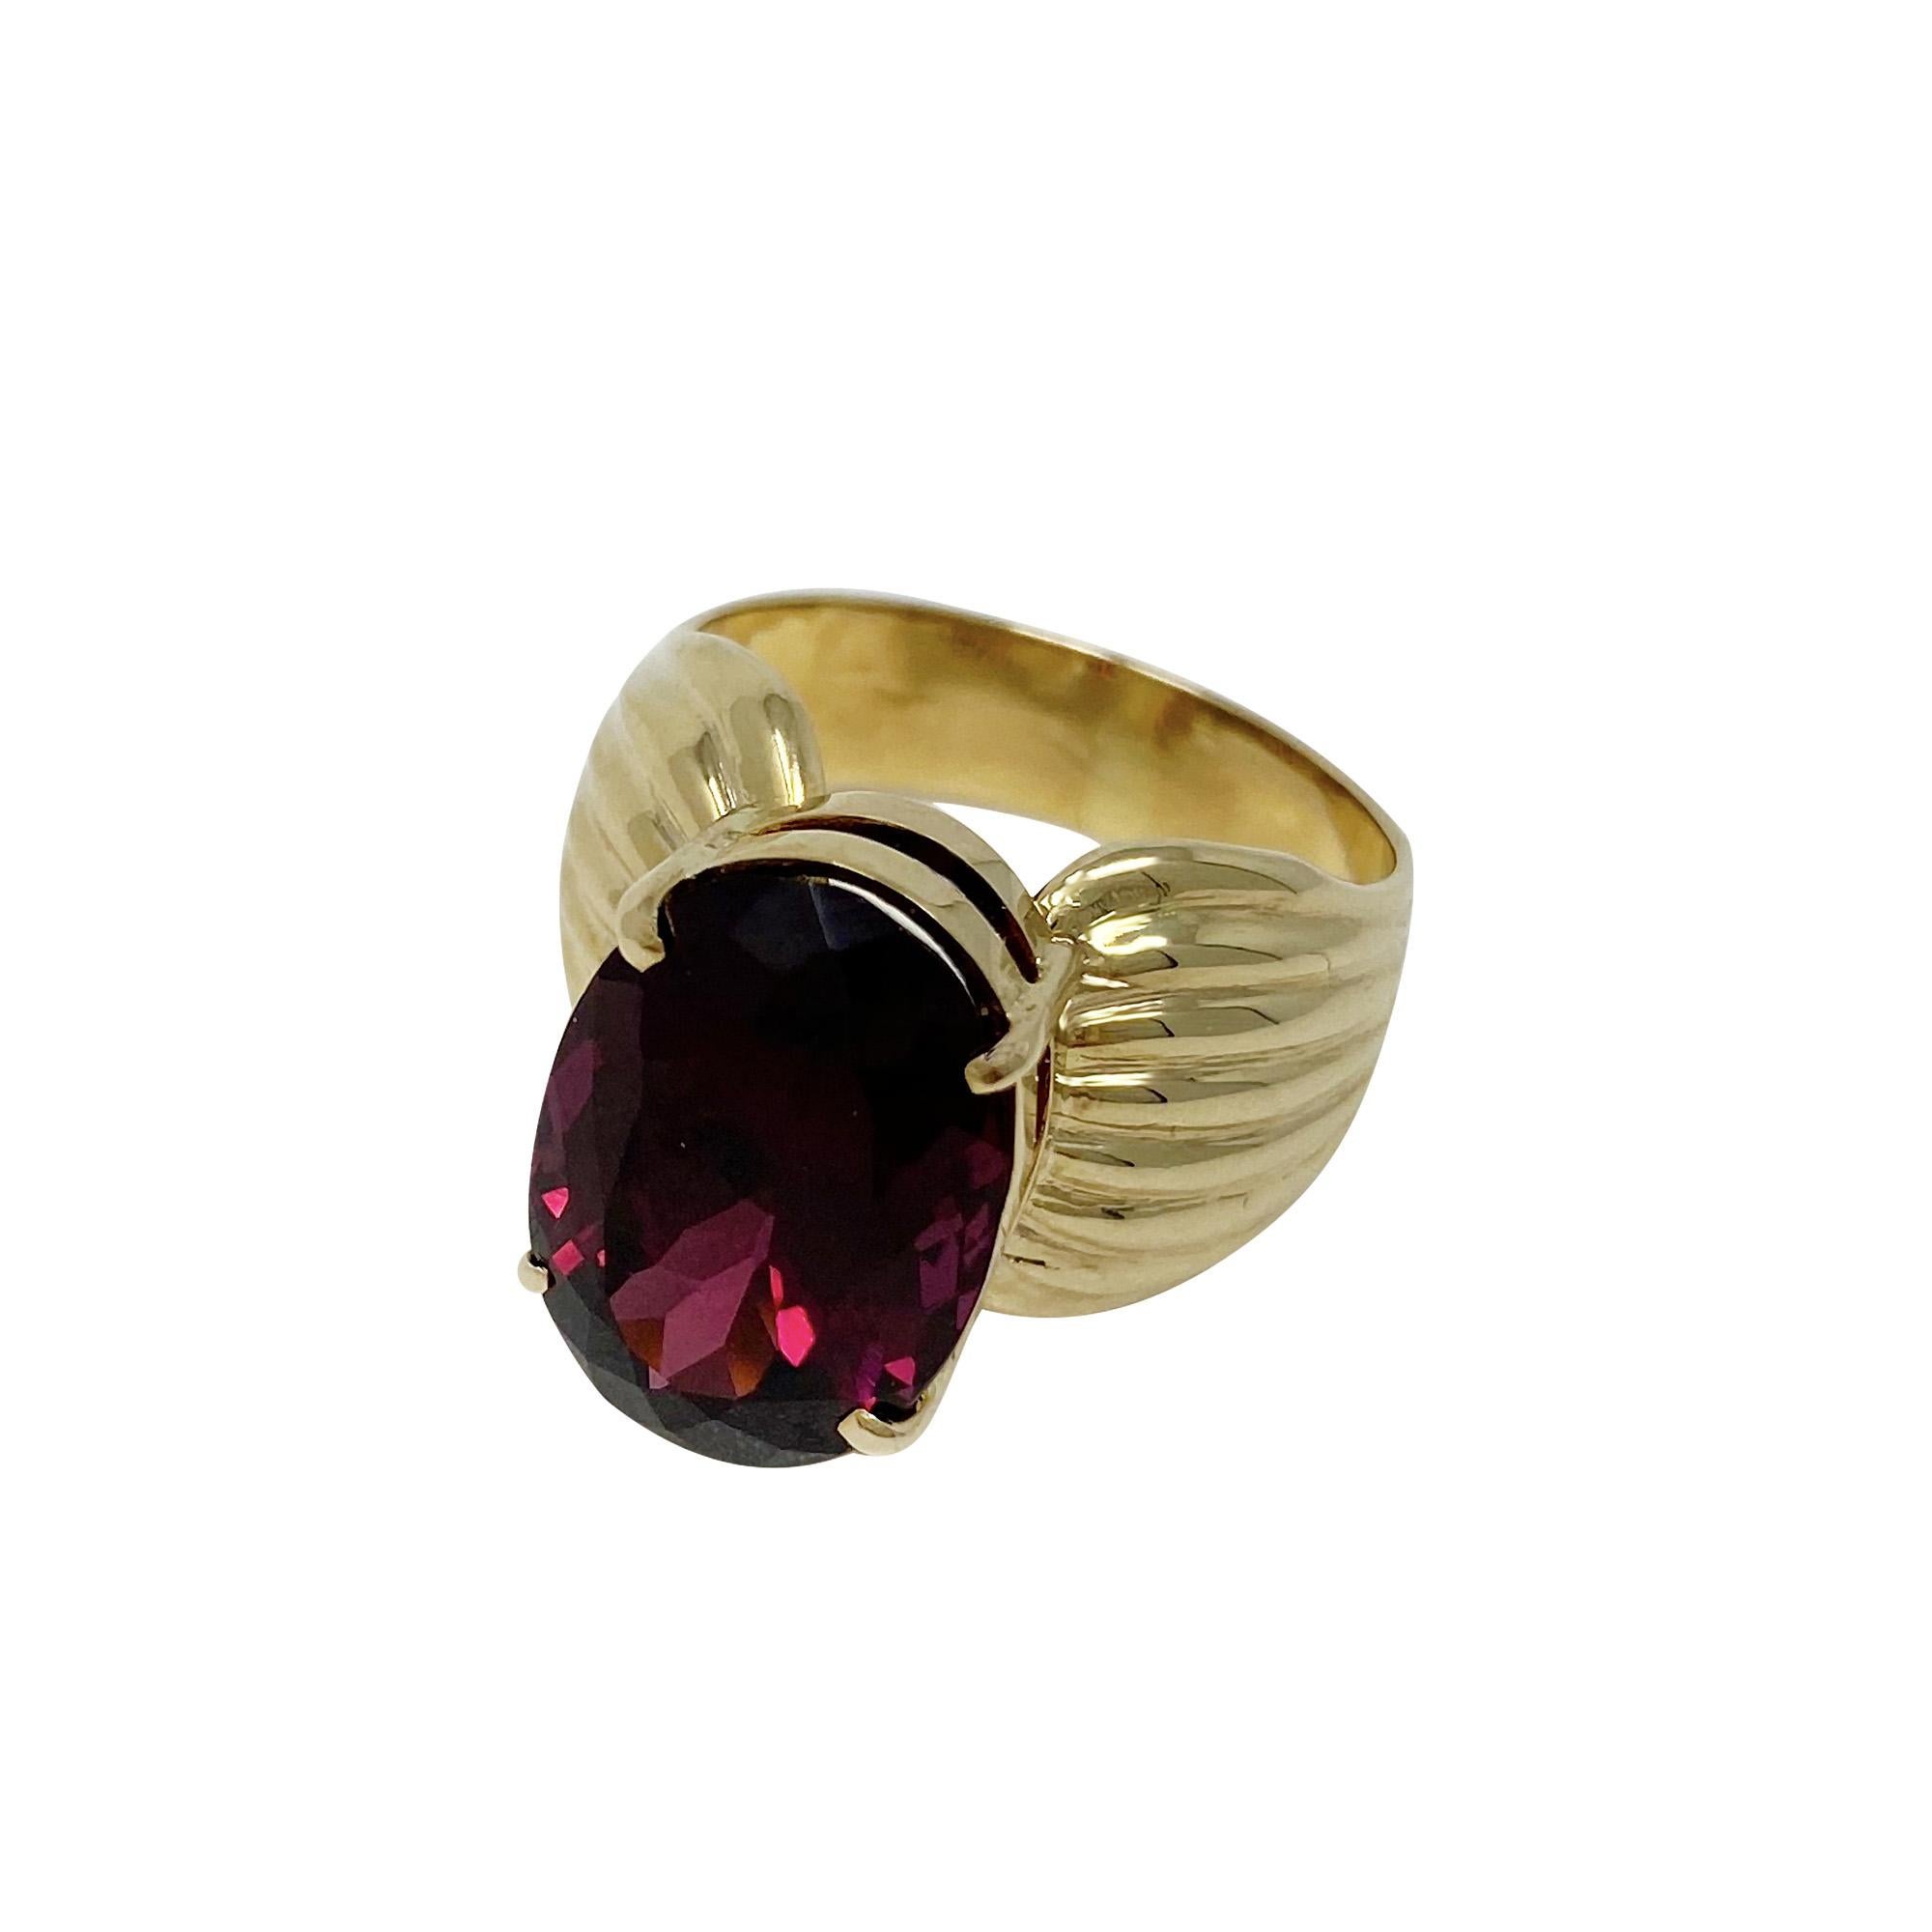 A great statement piece and so very light and comfortable on the finger!  This 14 karat, yellow gold, ribbed mounting is centered with one prong-set, oval-shaped garnet and is a size 7 1/2.